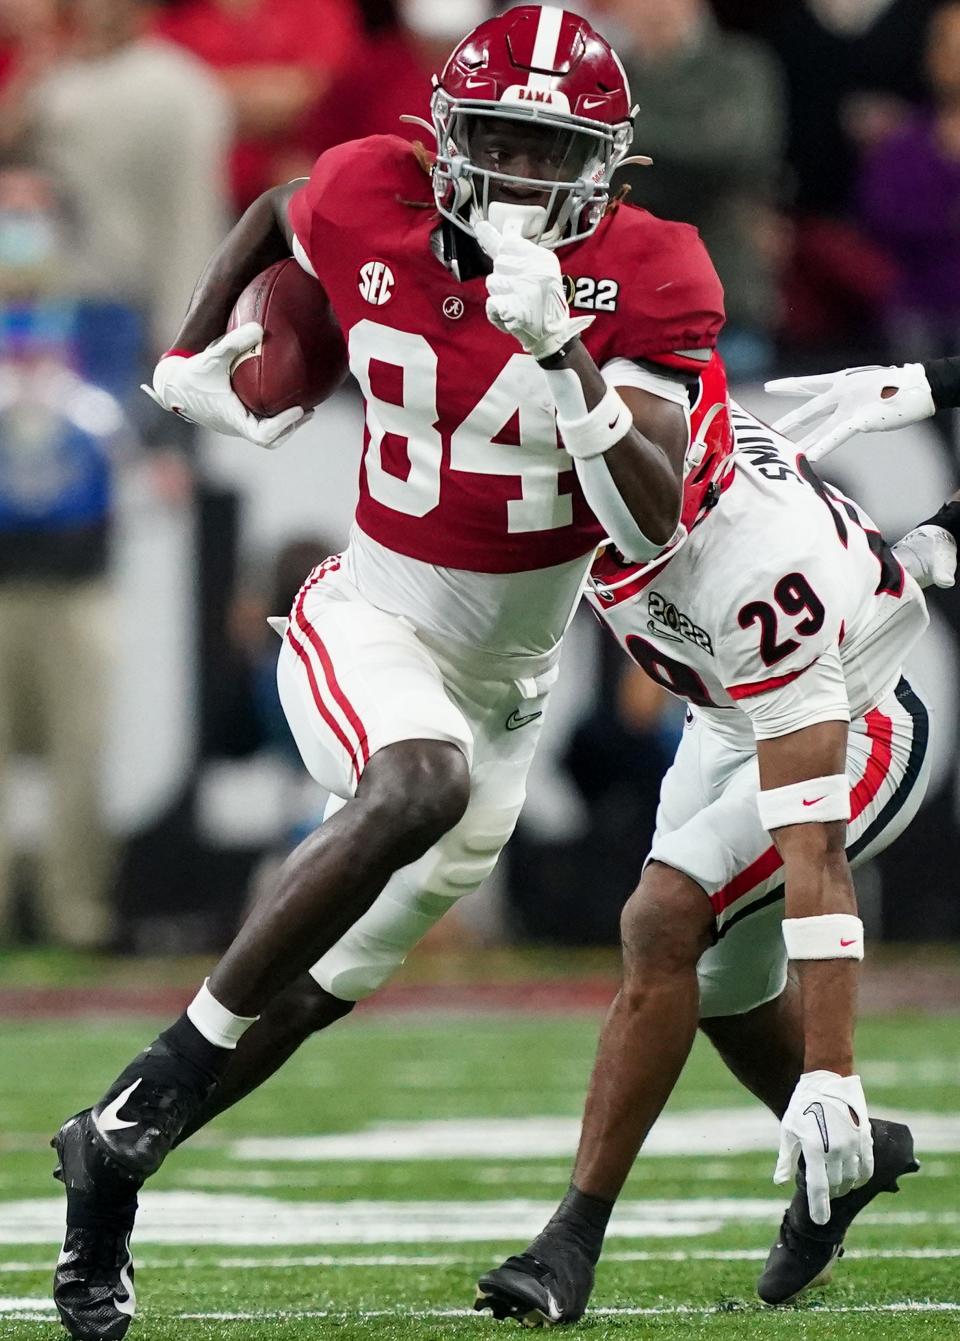 Jan 10, 2022; Indianapolis, IN, USA; Alabama wide receiver Agiye Hall (84) carries the ball against Georgia during the 2022 CFP college football national championship game at Lucas Oil Stadium.